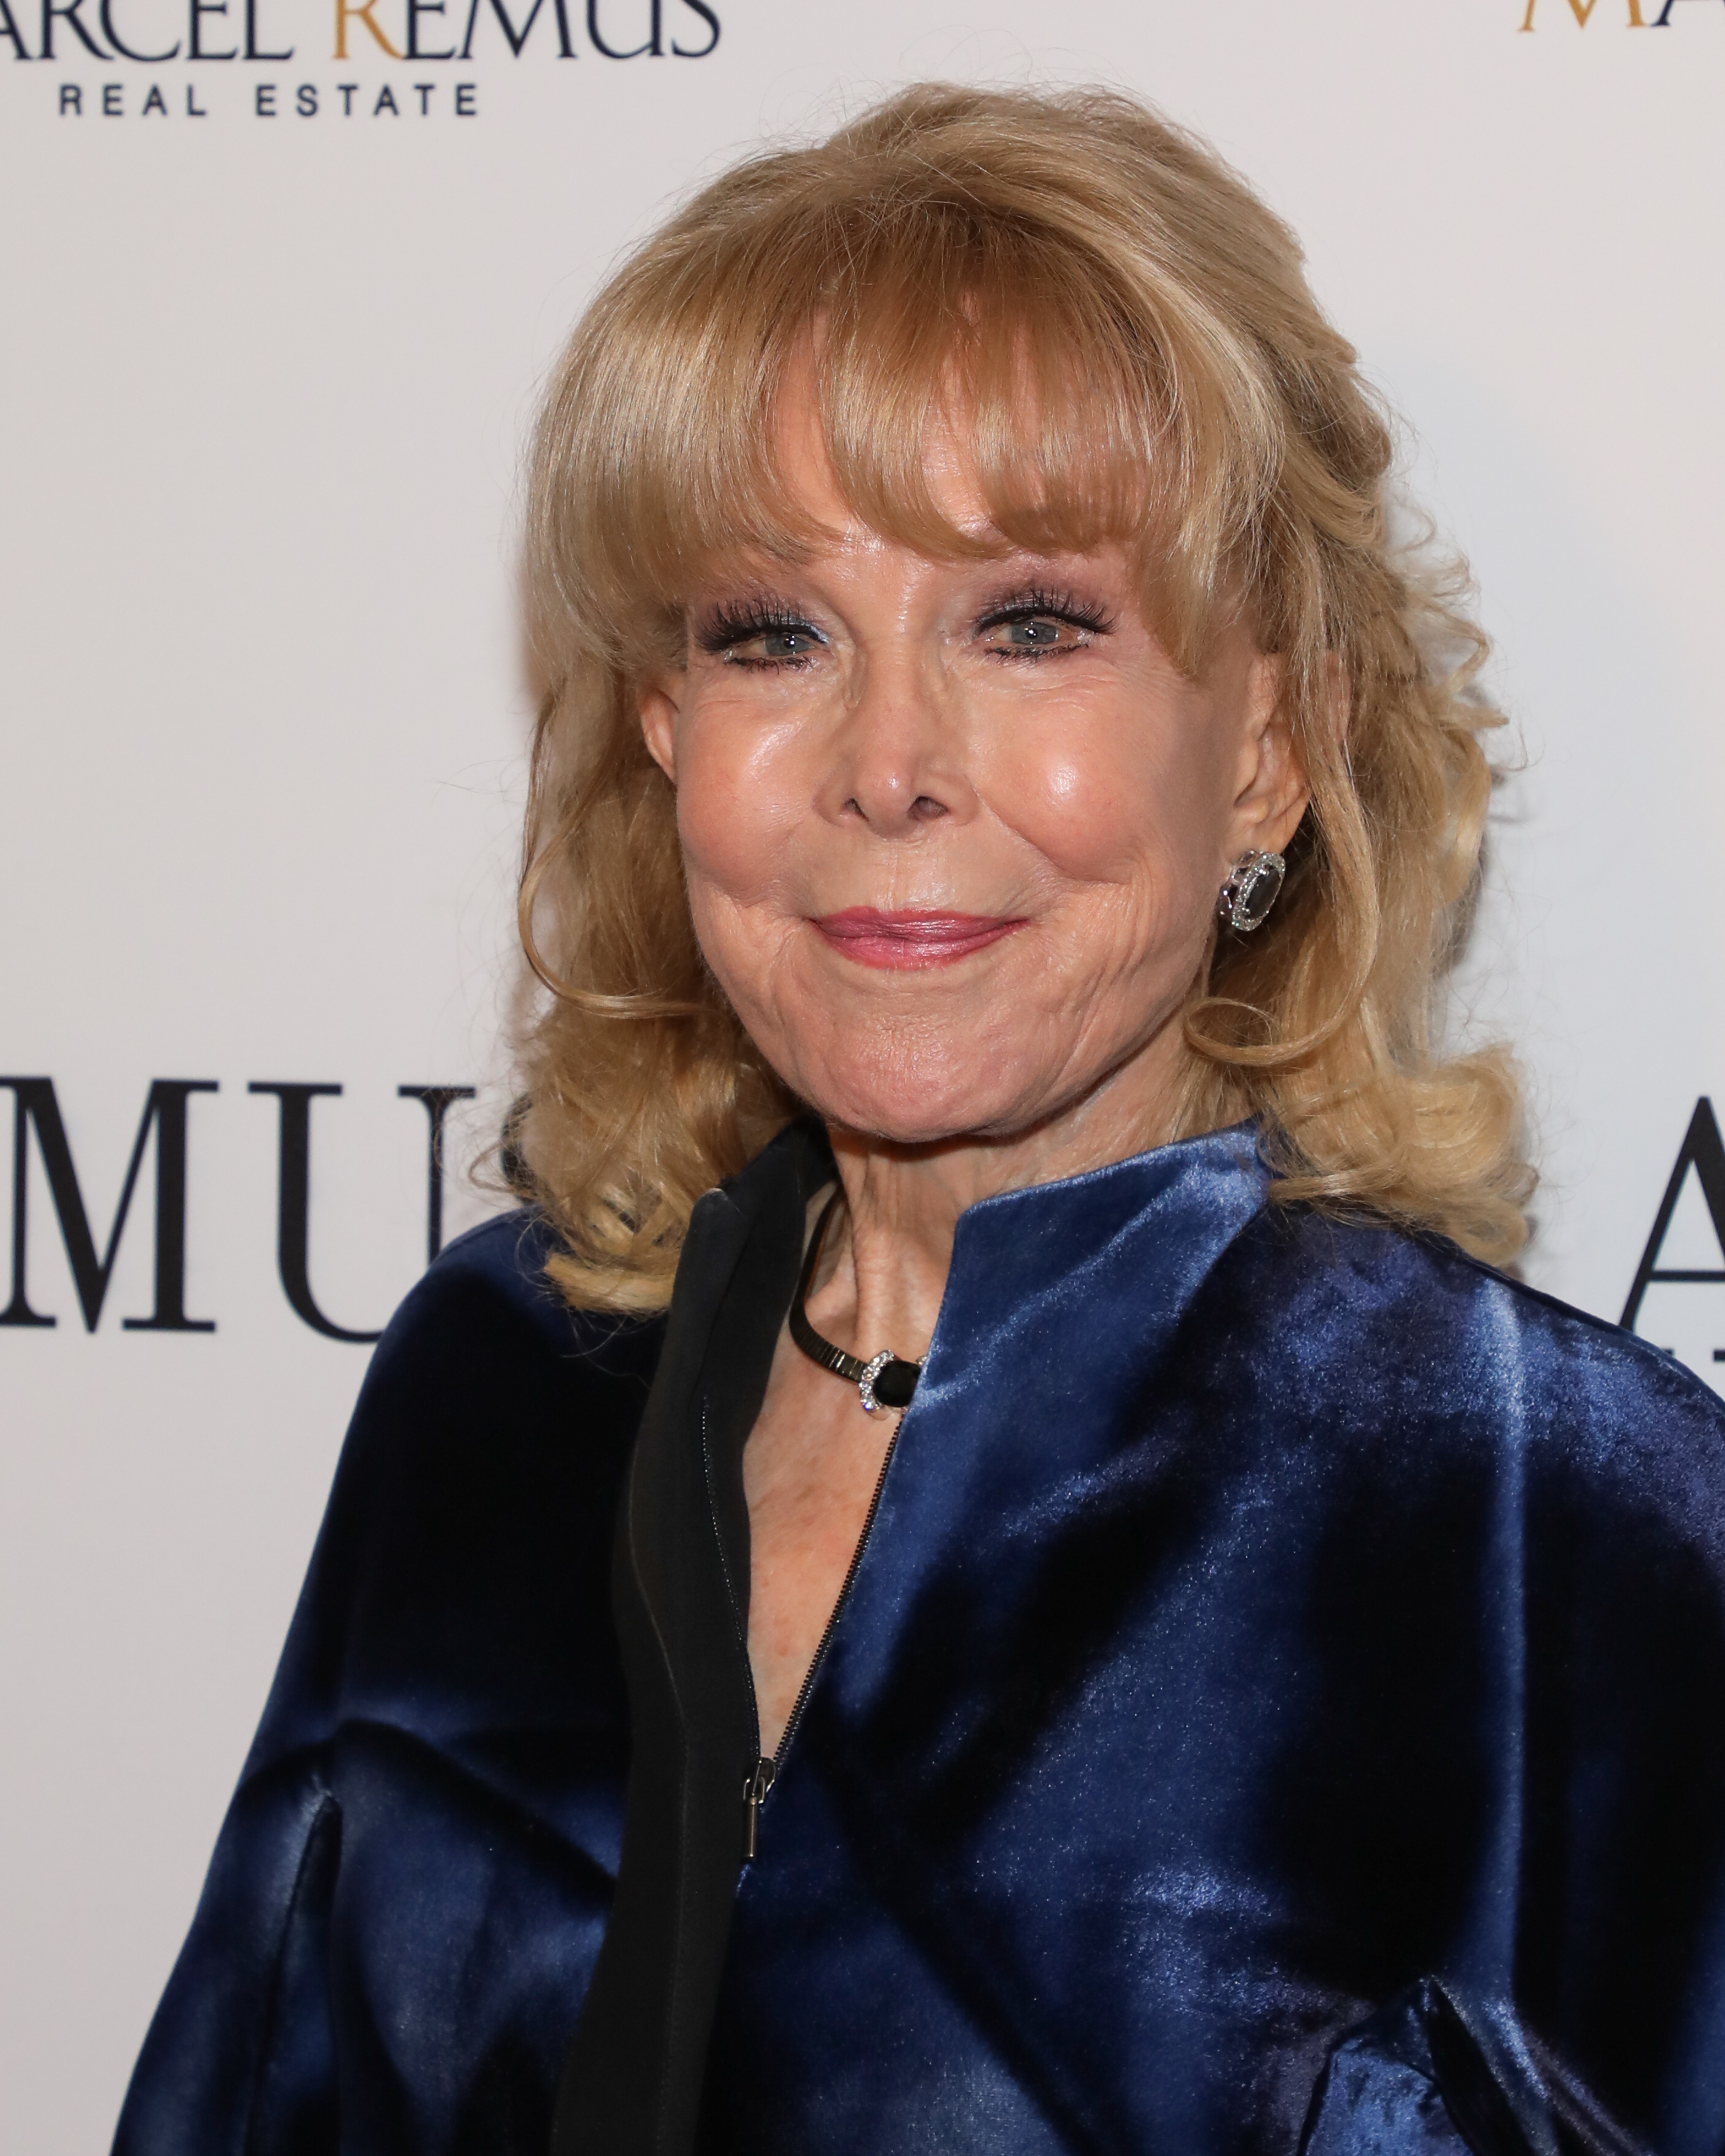 Barbara Eden during the Remus Pre-Award Tea Time event in Beverly Hills, California on March 08, 2023 | Source: Getty Images